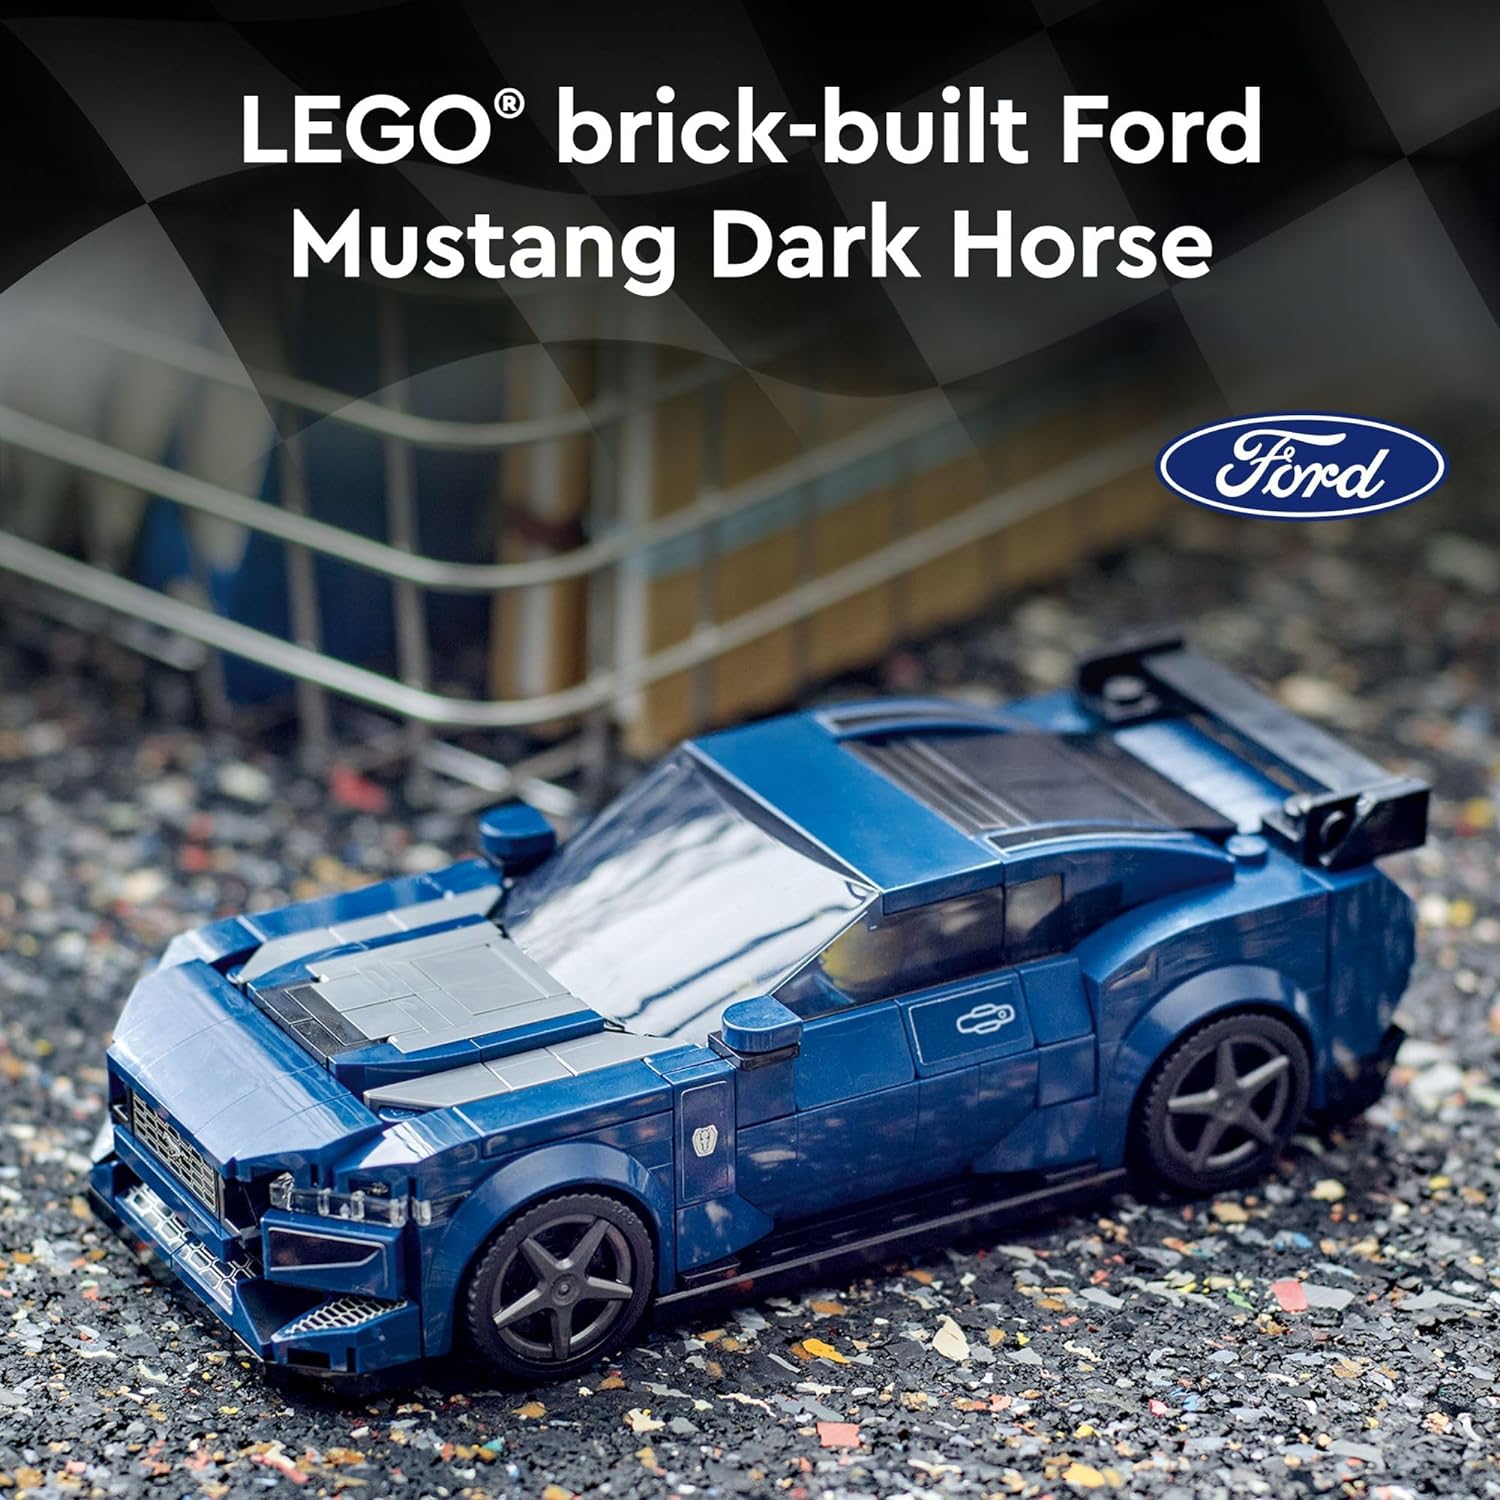 LEGO Speed Champions Ford Mustang Dark Horse Sports Car Toy 76920, Buildable Ford Mustang Toy for Kids, Blue Toy Car Model Set